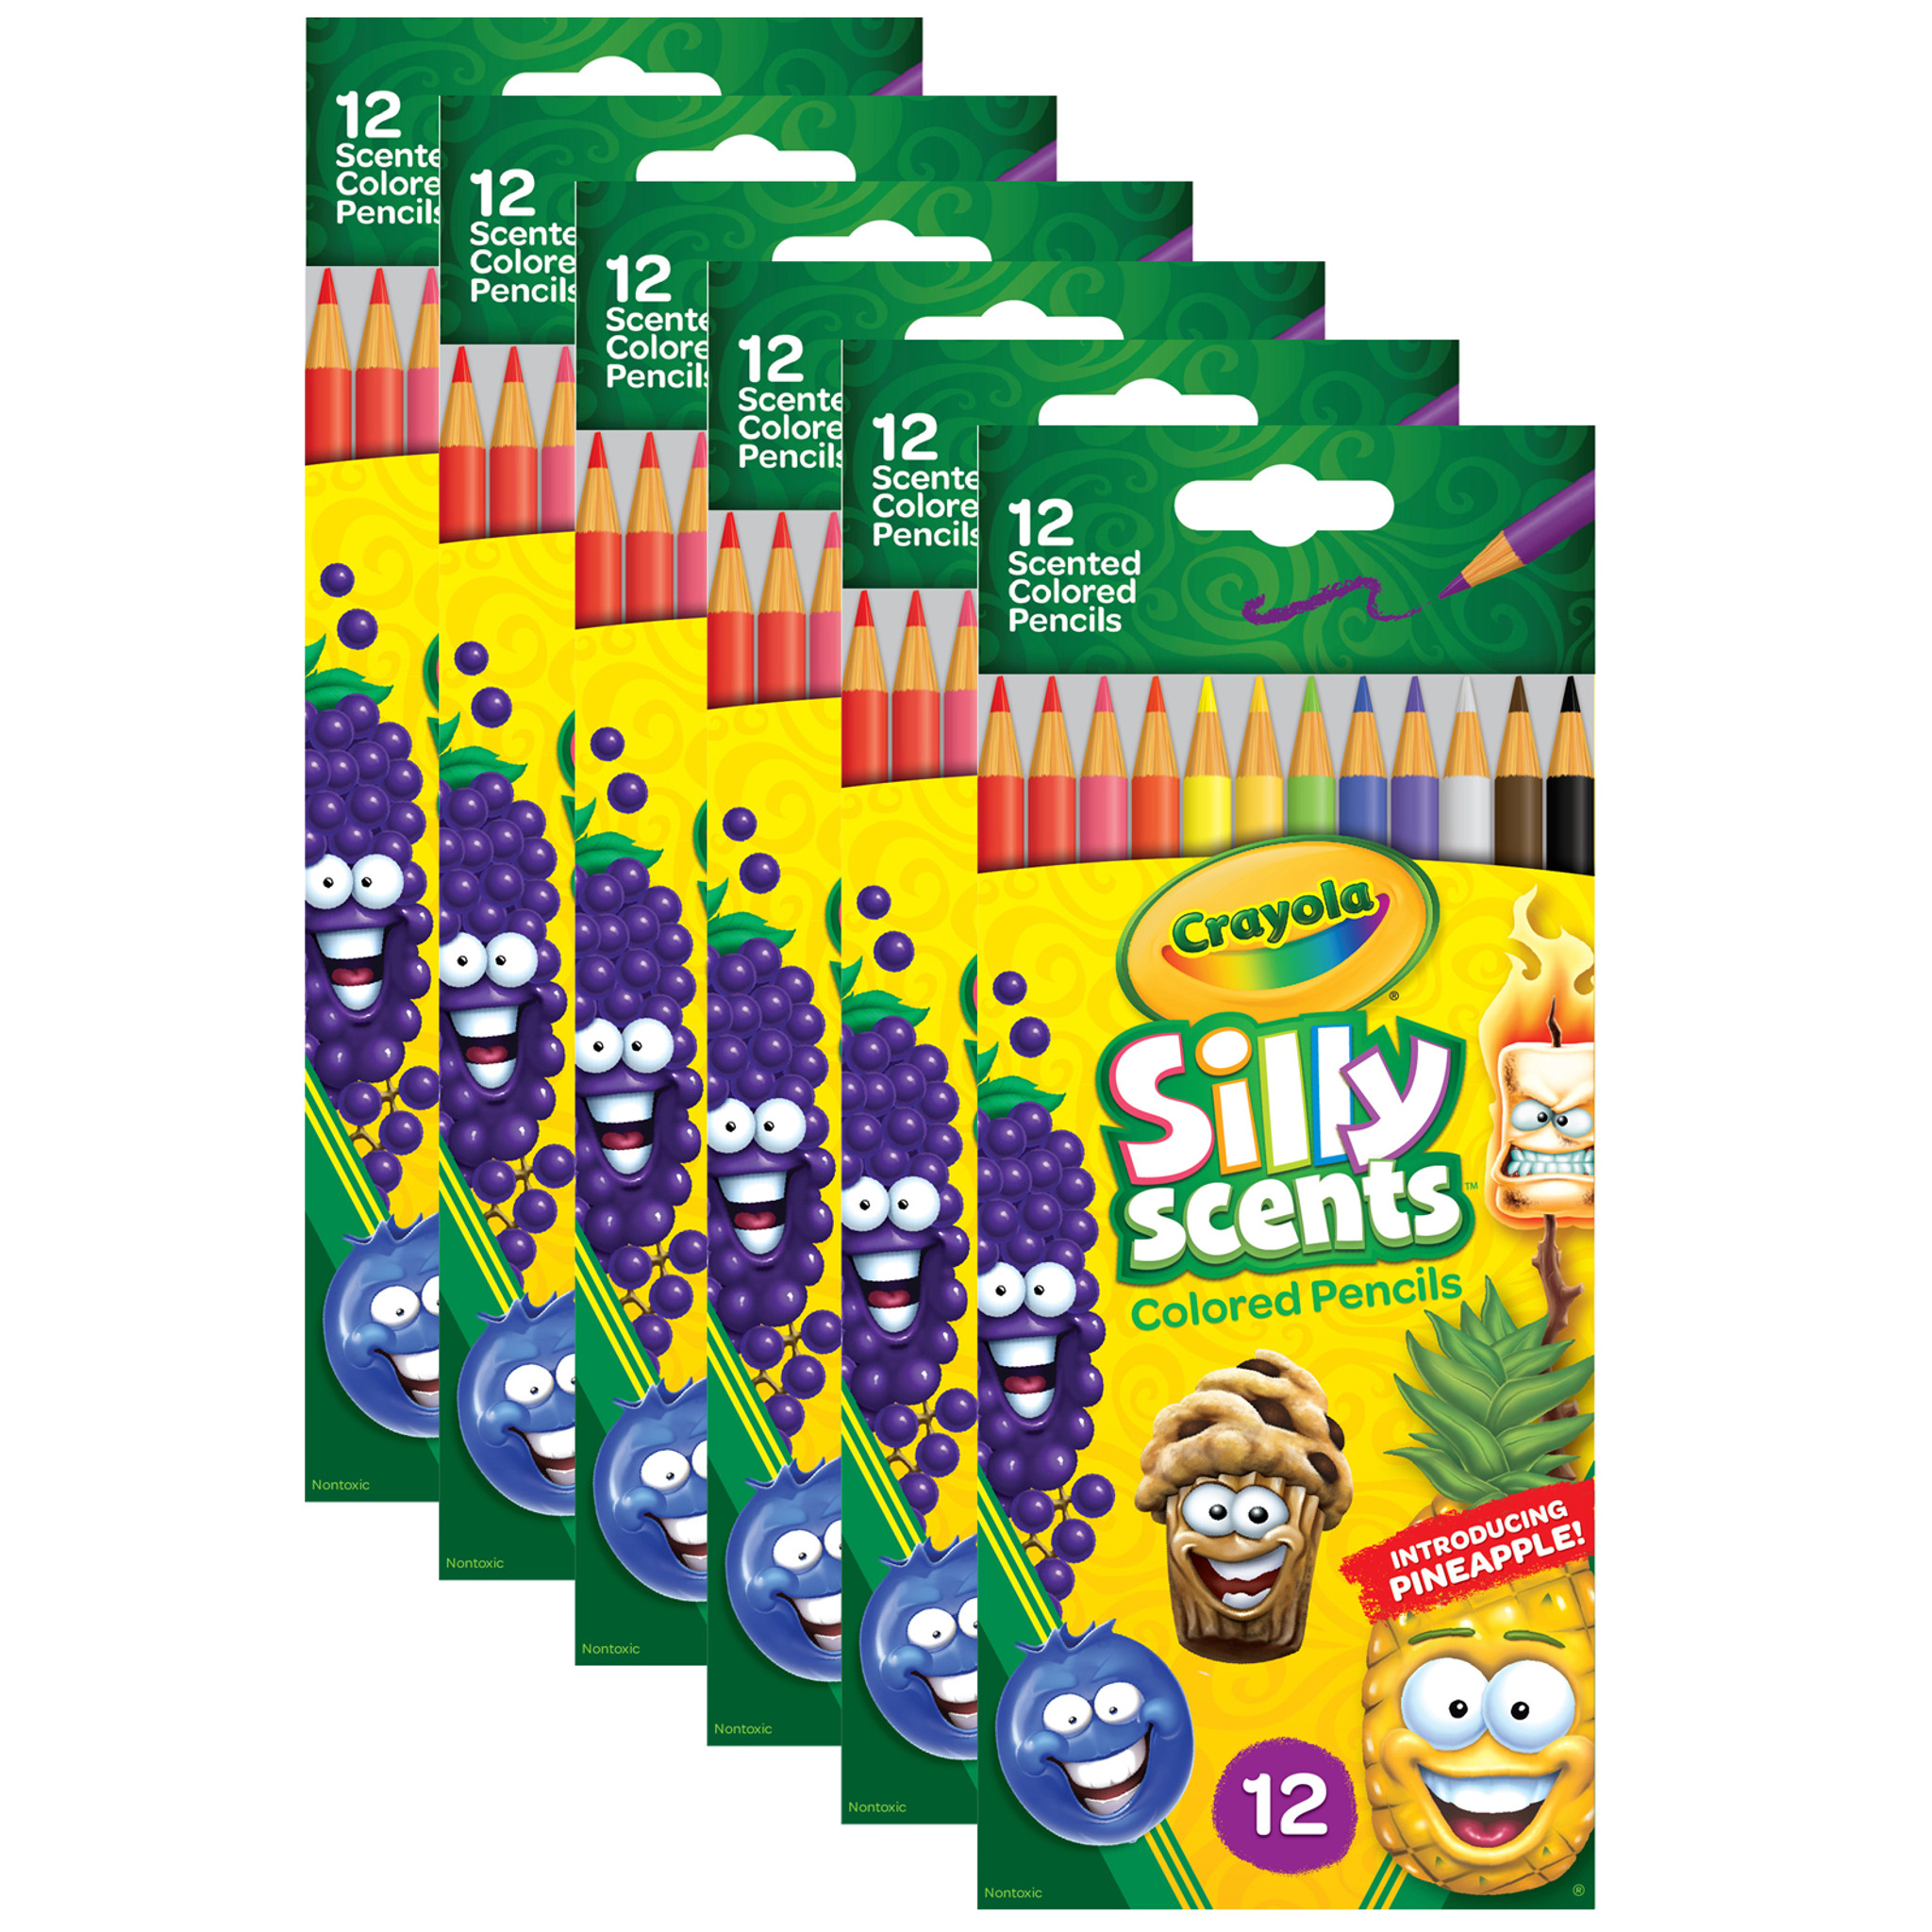 Genuine Crayola 12 Pack of Silly Scents Twistable Colored Pencils